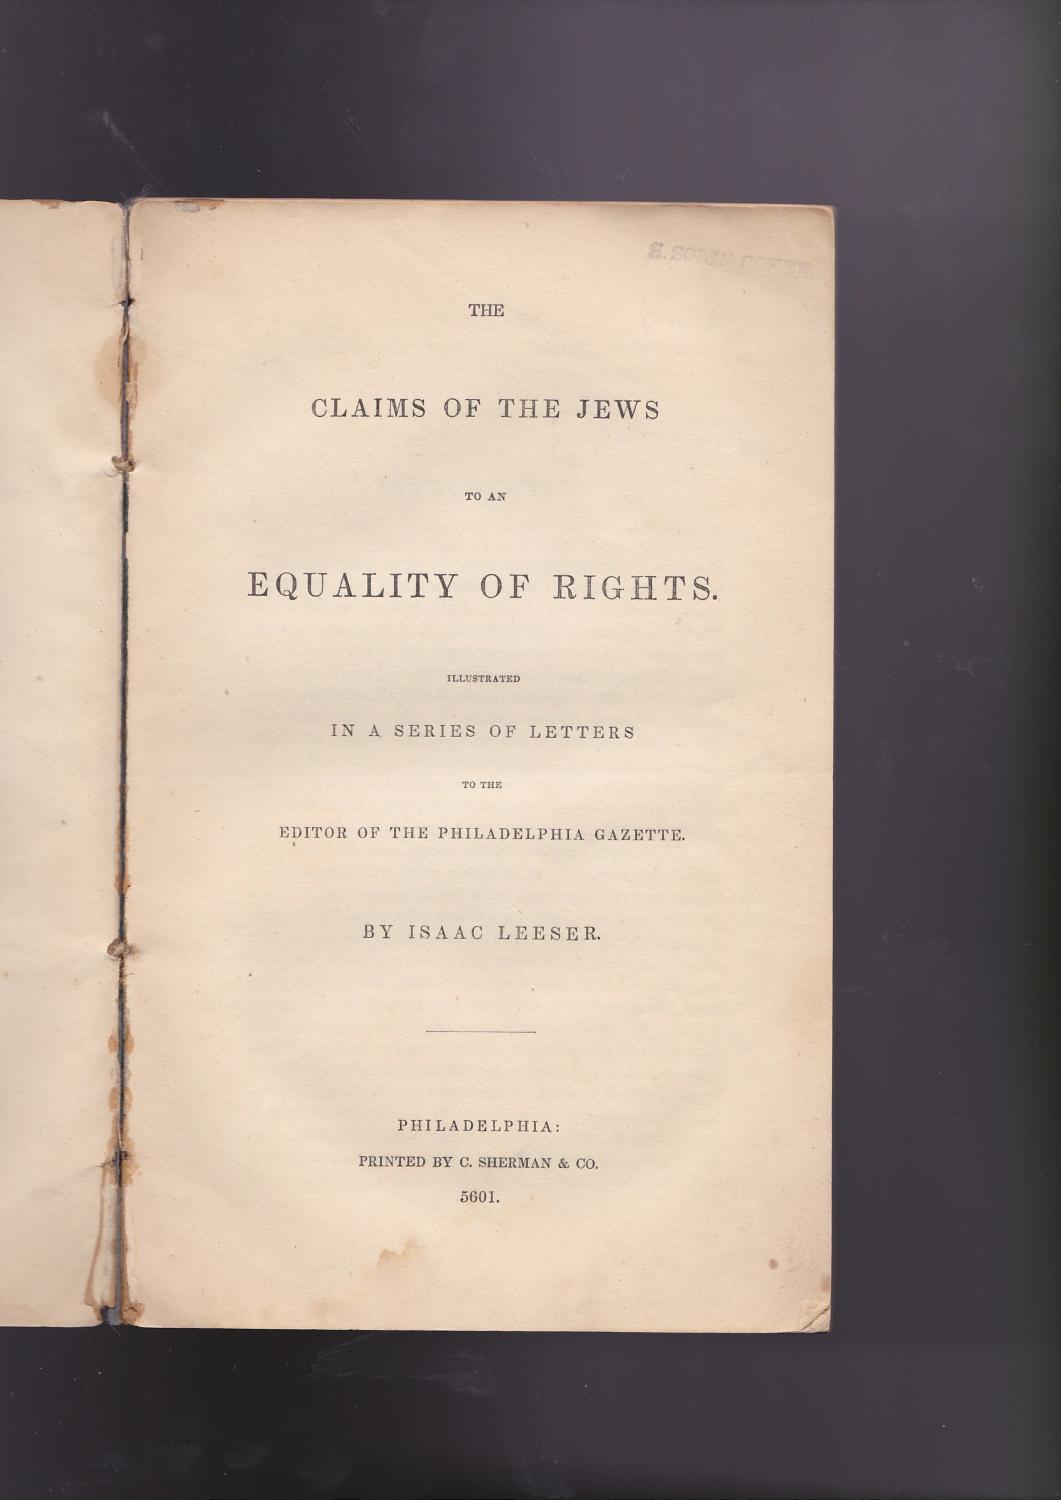 Of The Jews To An Equality Of Rights: Illustrated In A Series Of Letters To The Editor Of The by Leeser, Isaac (1806 Germany -1868 United States): Very